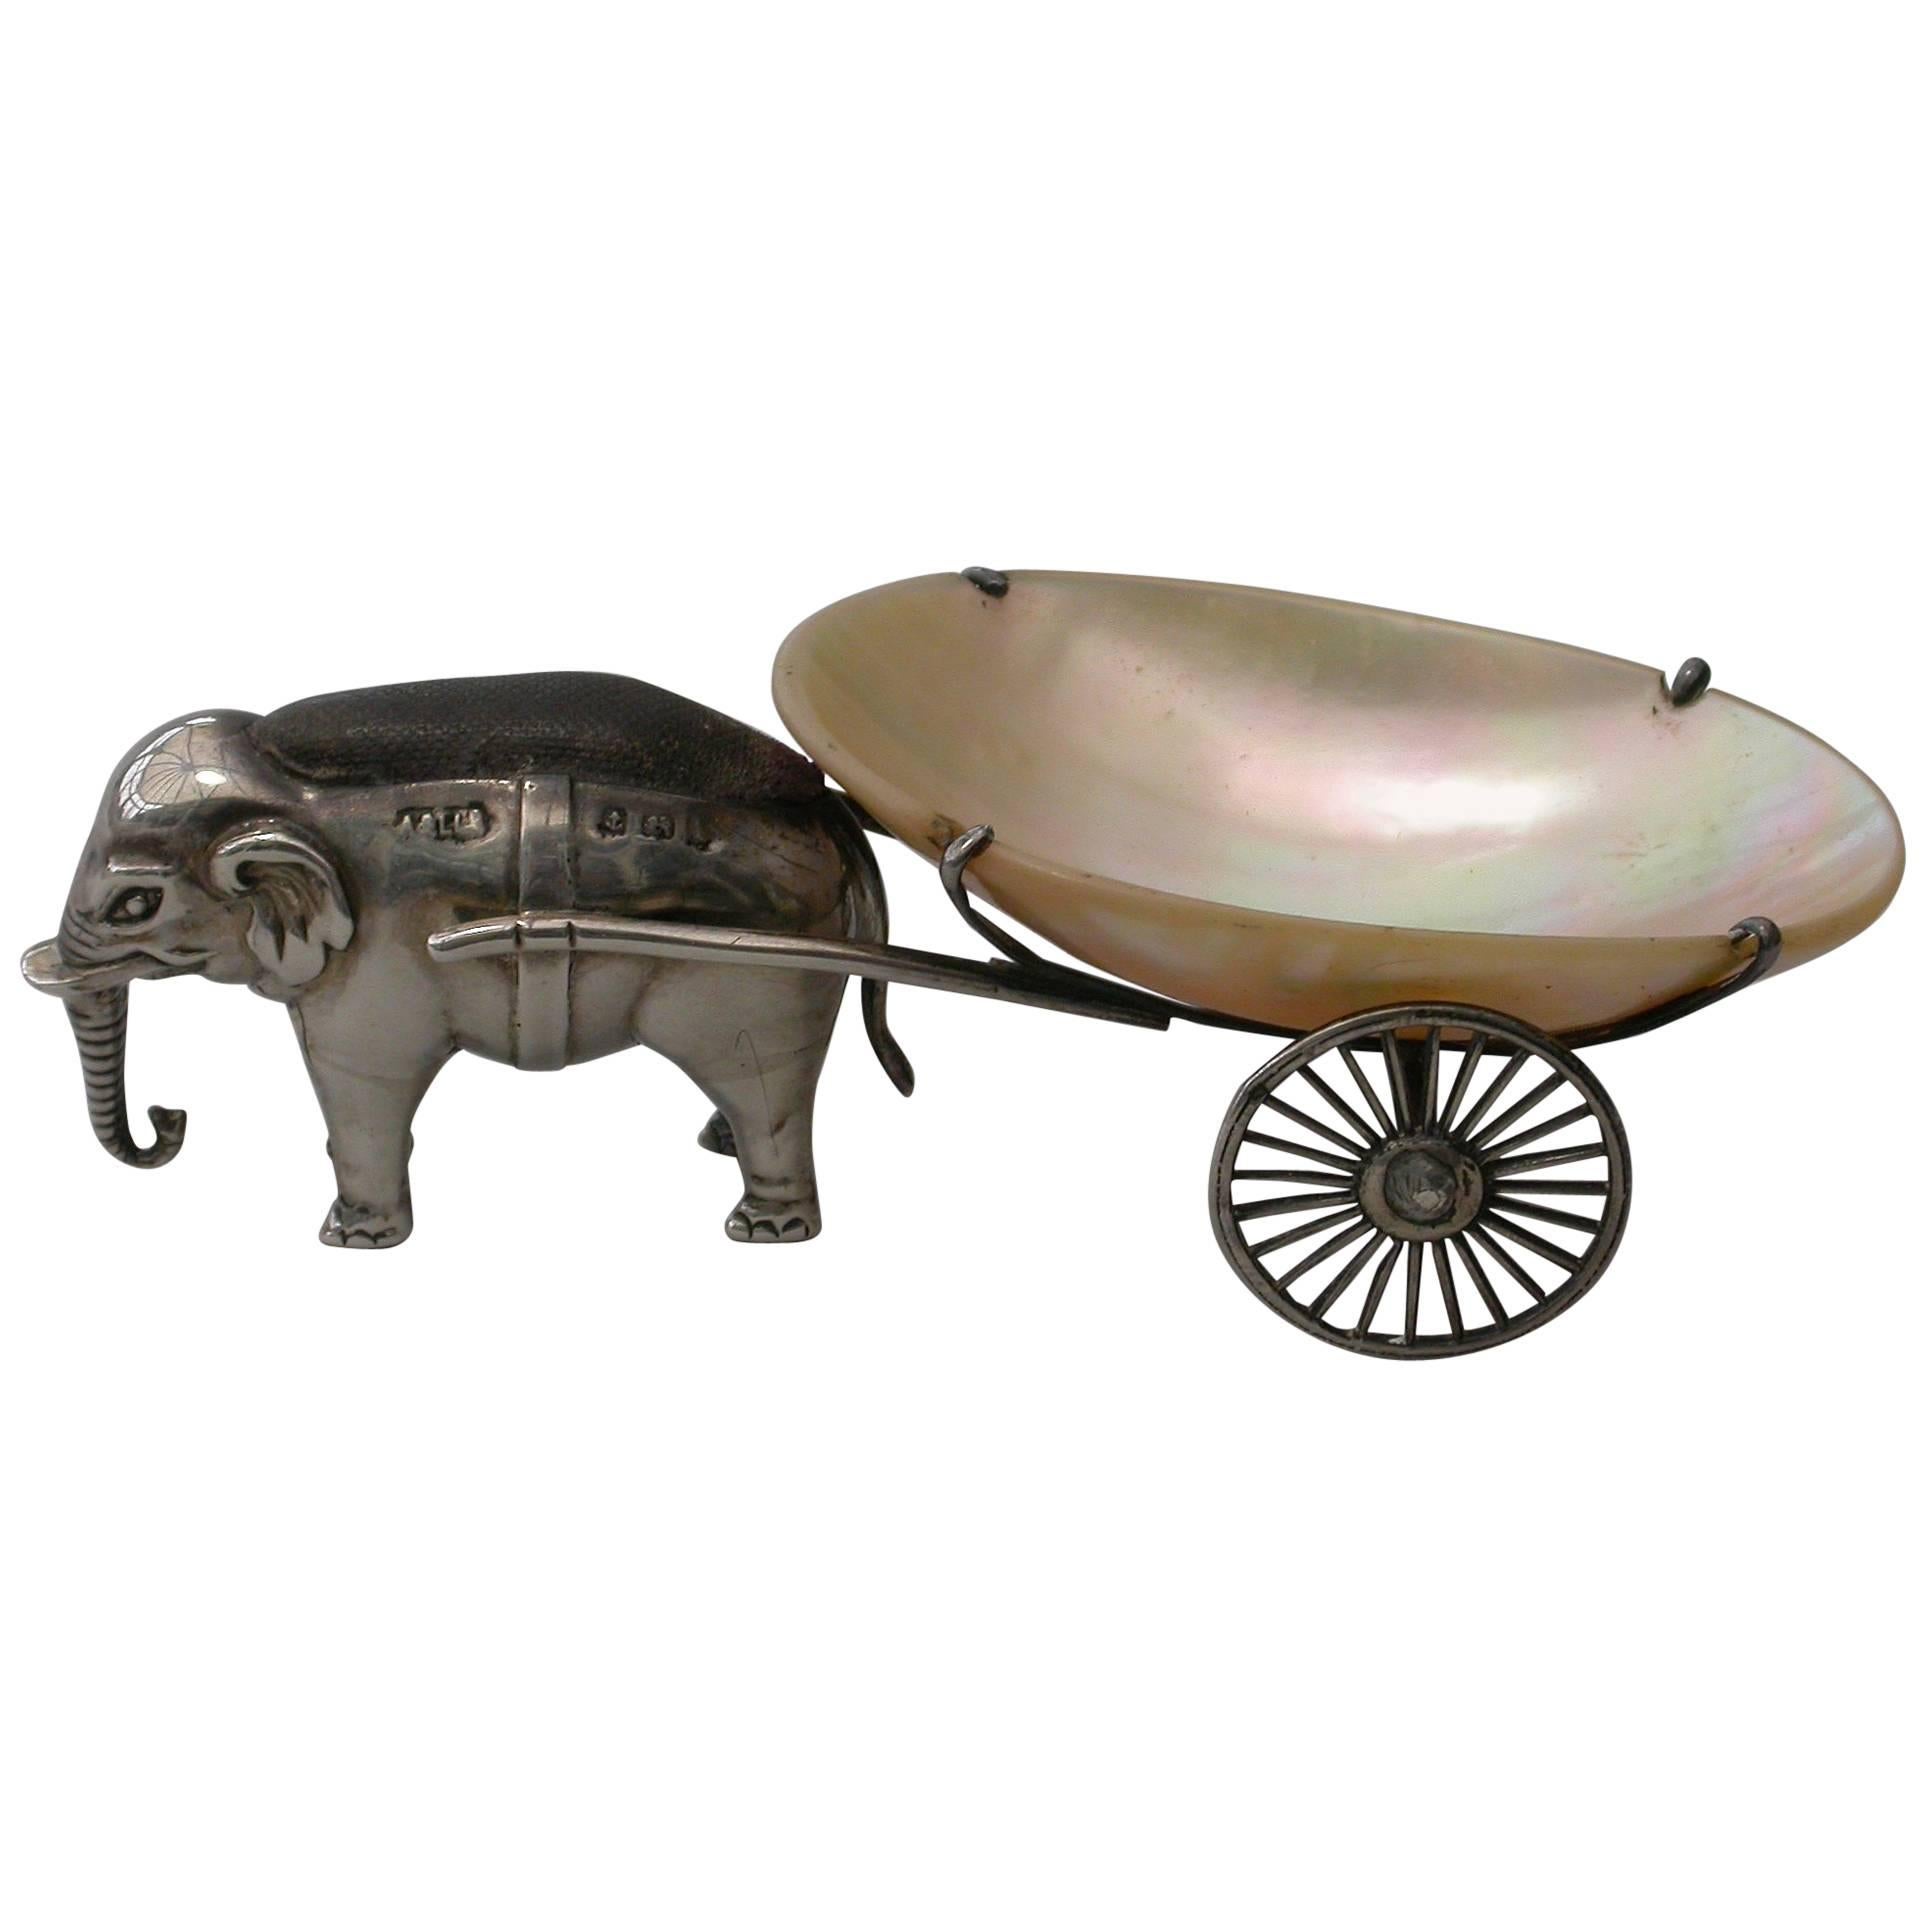 A rare Edwardian novelty silver pin cushion made in the form of an elephant pulling a mother of pearl cart.

By Adie & Lovekin, Birmingham, 1910

In fine original condition with no damage or repair

Measures: Height 33 mm (1.30 inches)
Width